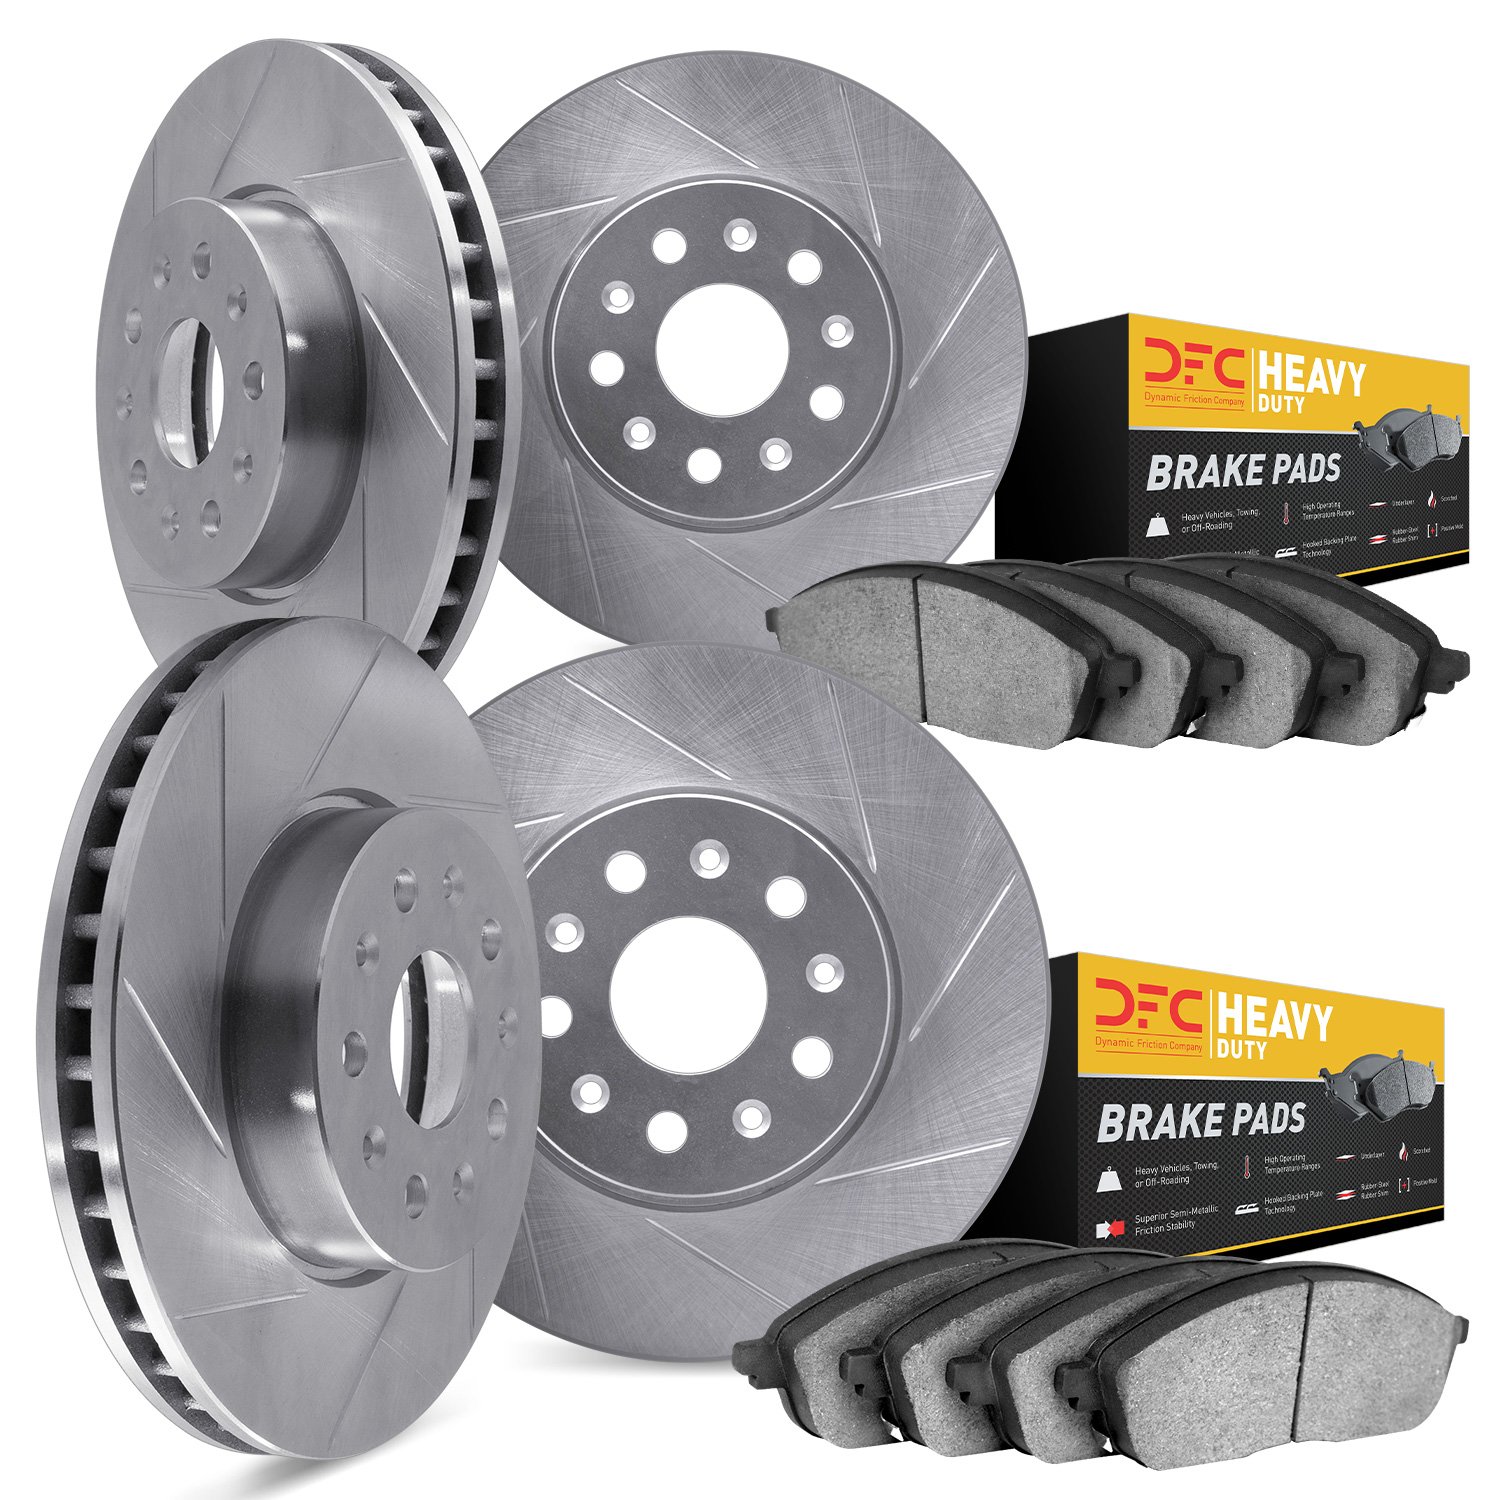 5204-76007 Slotted Brake Rotors w/Heavy-Duty Brake Pads Kits [Silver], 2008-2021 Lexus/Toyota/Scion, Position: Front and Rear